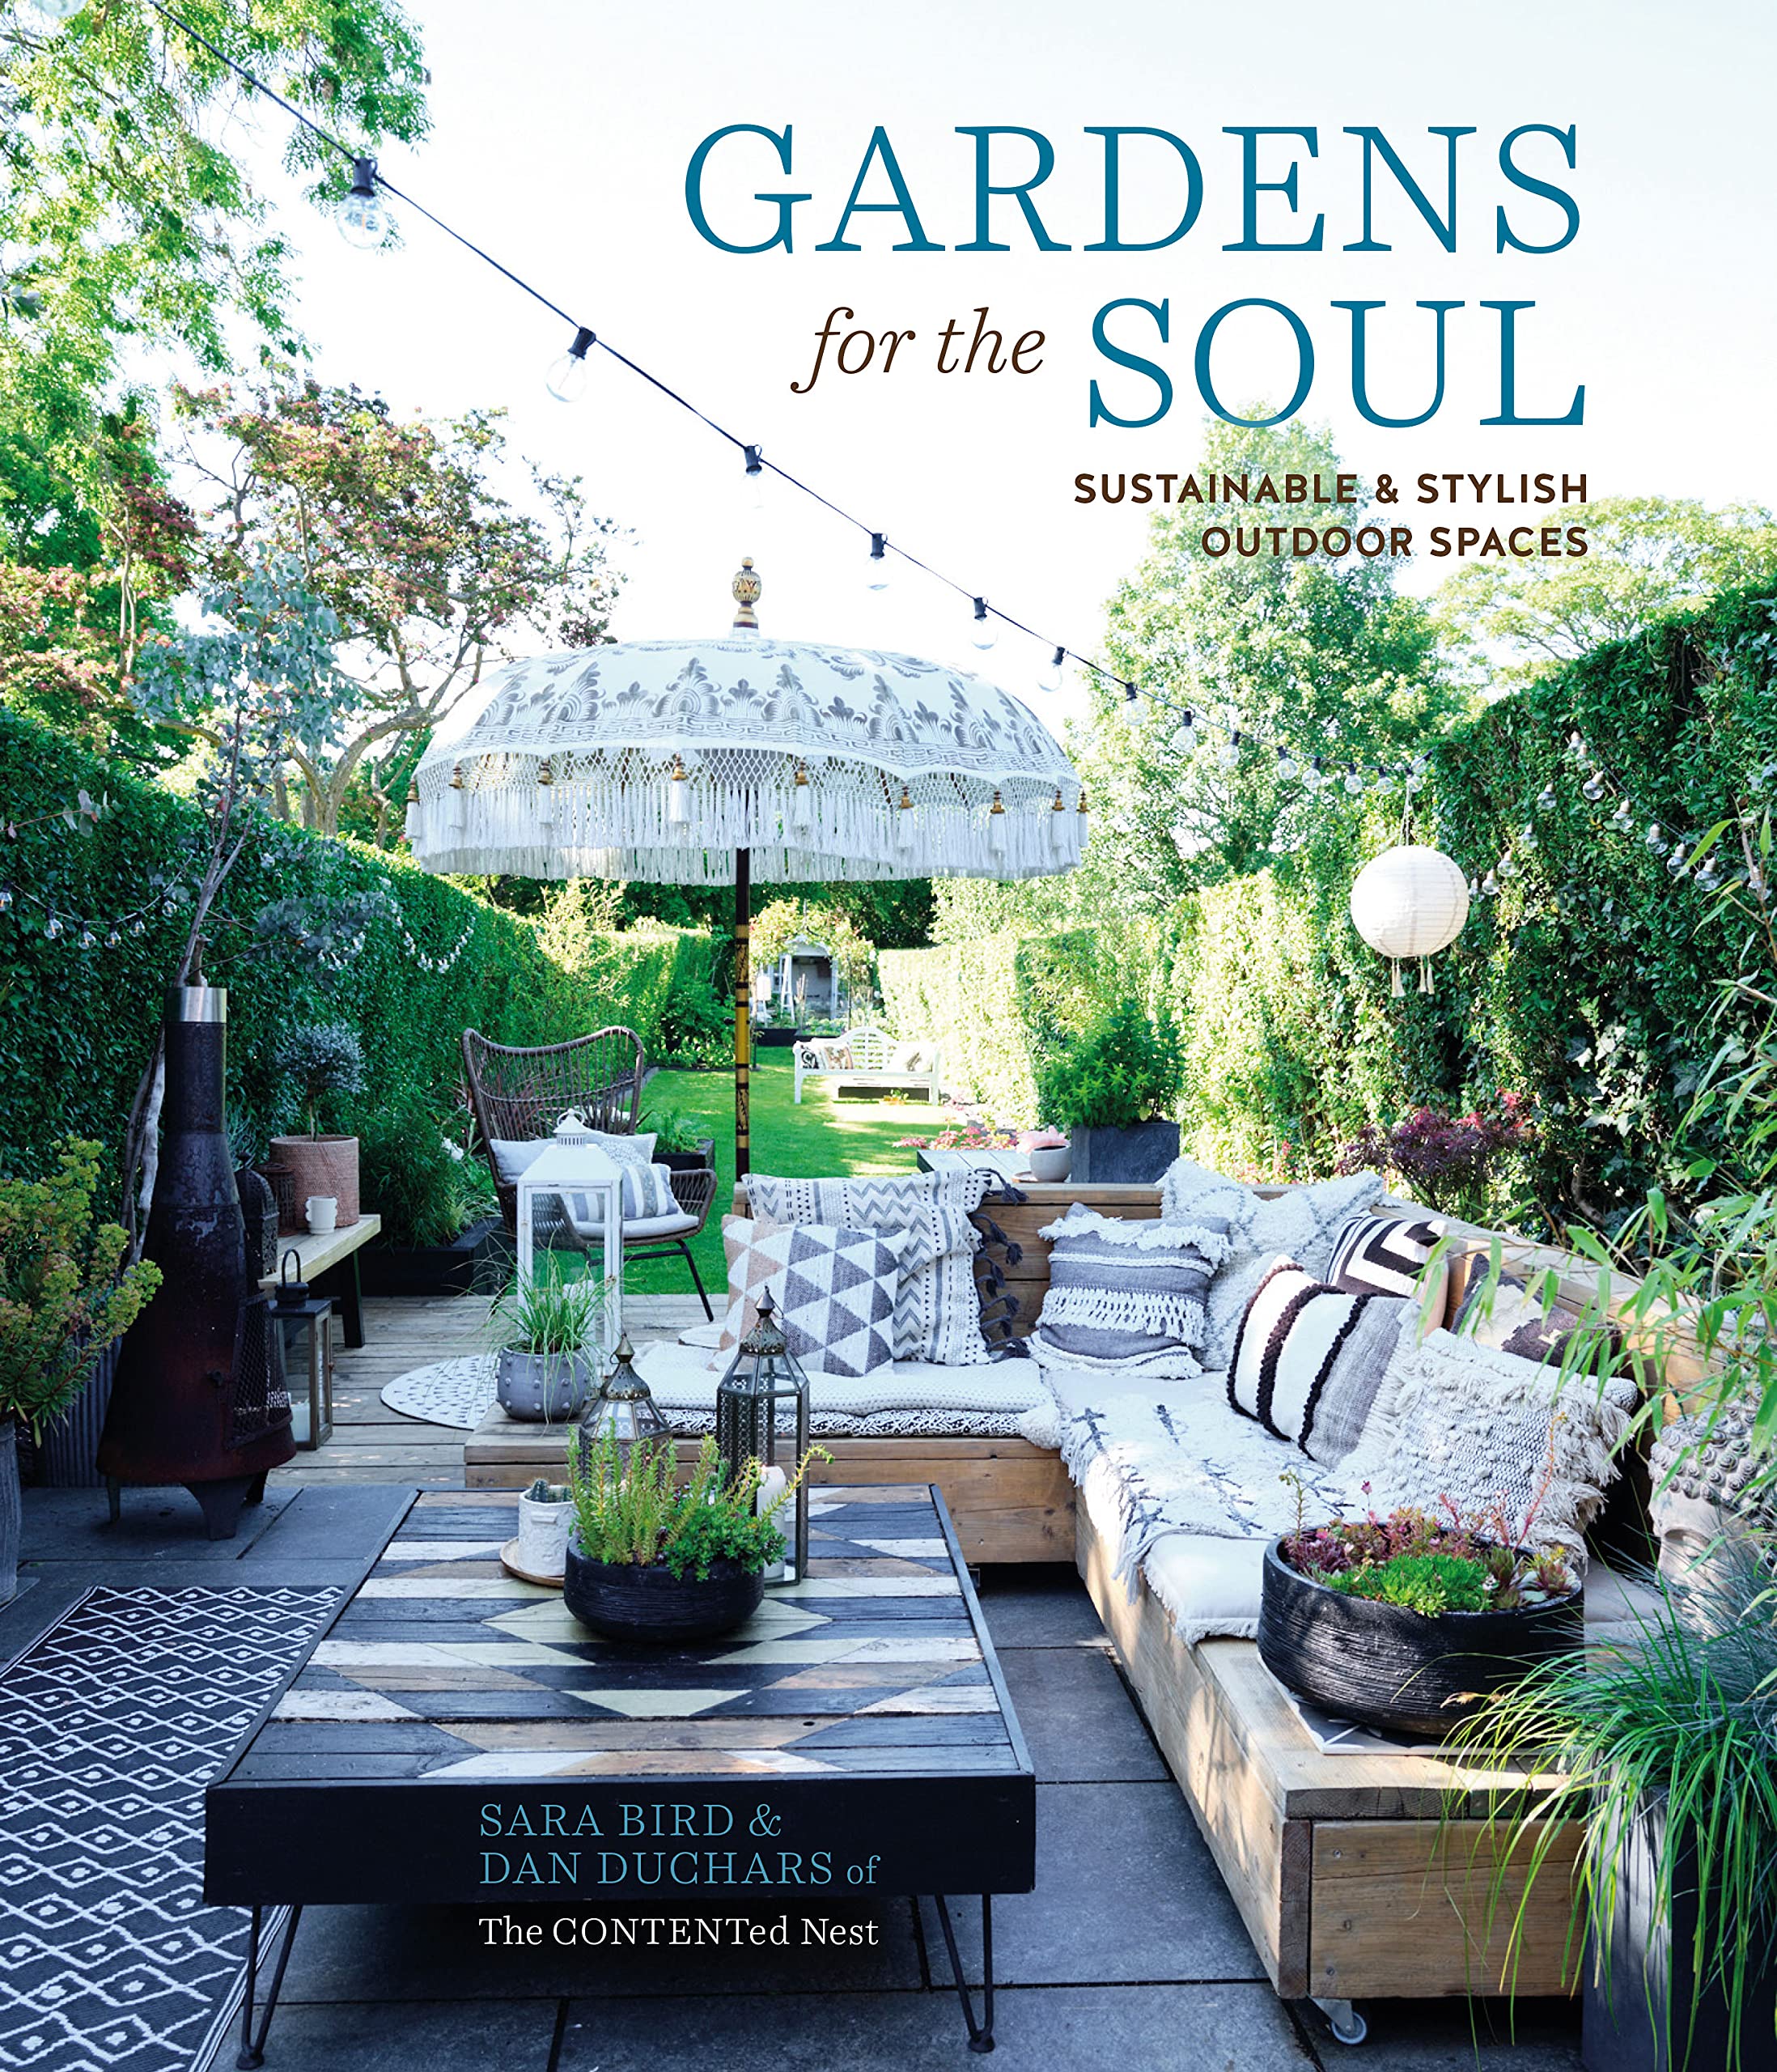 Gardens-for-the-Soul-Sustainable-and-Stylish-Outdoor-Spaces